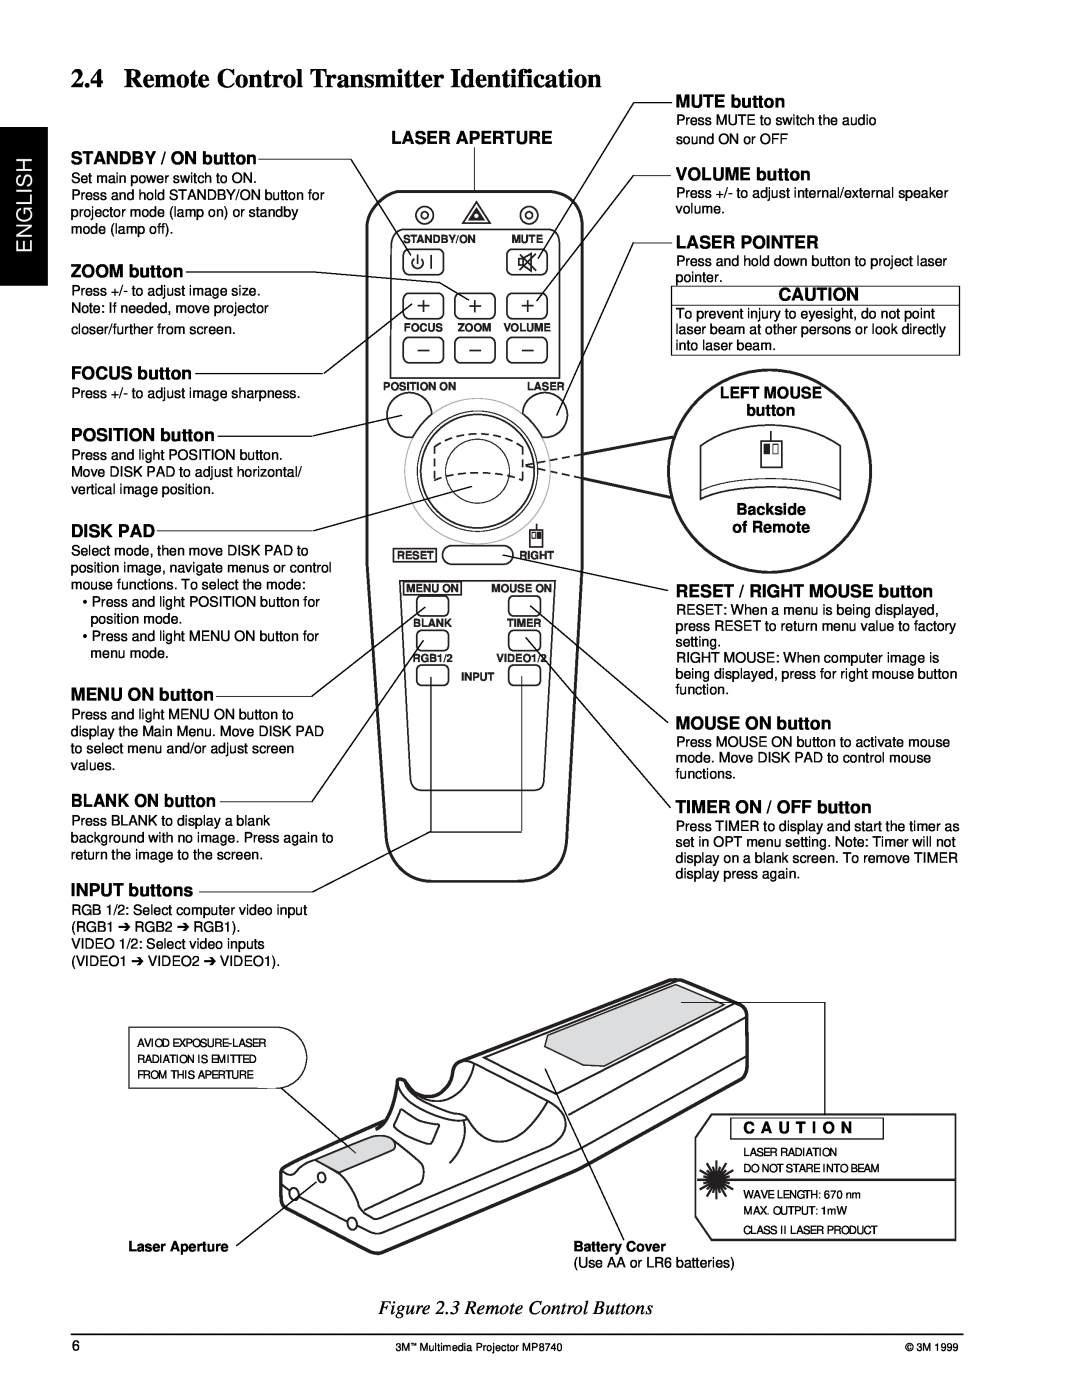 3M MP8740 manual Remote Control Transmitter Identification, English, 3 Remote Control Buttons 